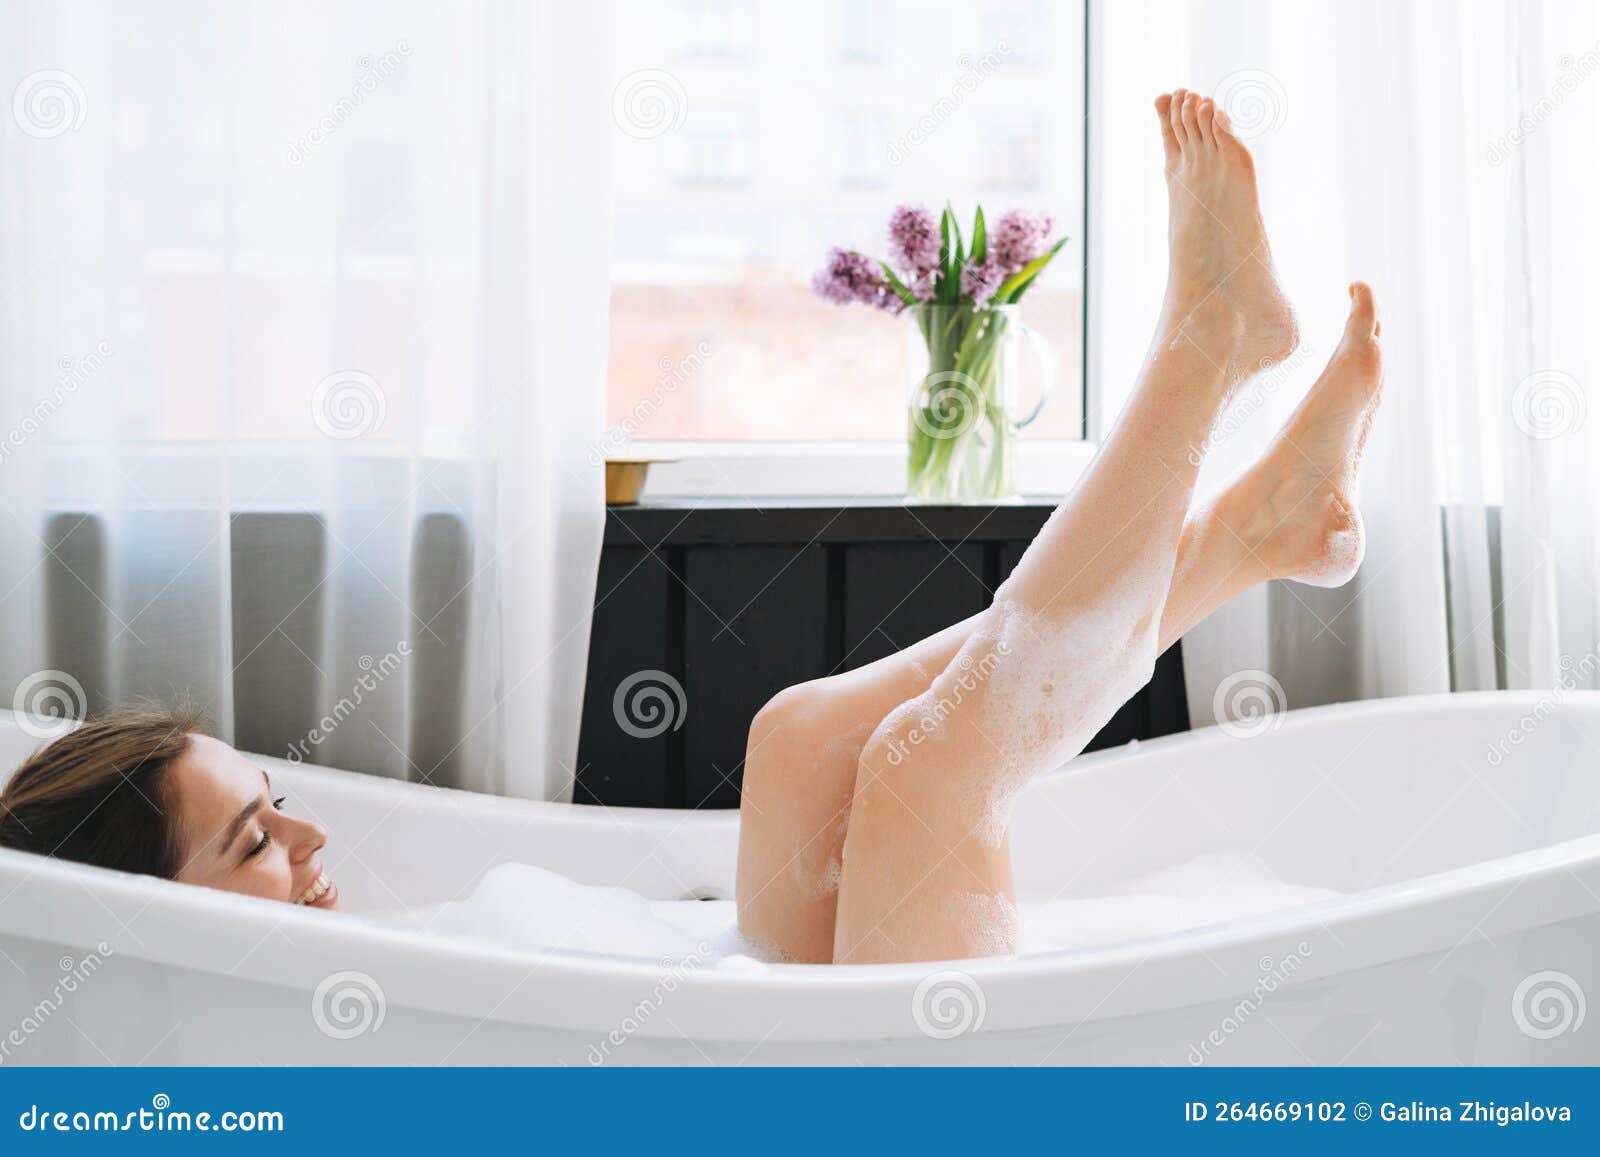 1,595 Young Woman Relaxing Taking Bath Stock Photos - Free & Royalty-Free  Stock Photos from Dreamstime - Page 3